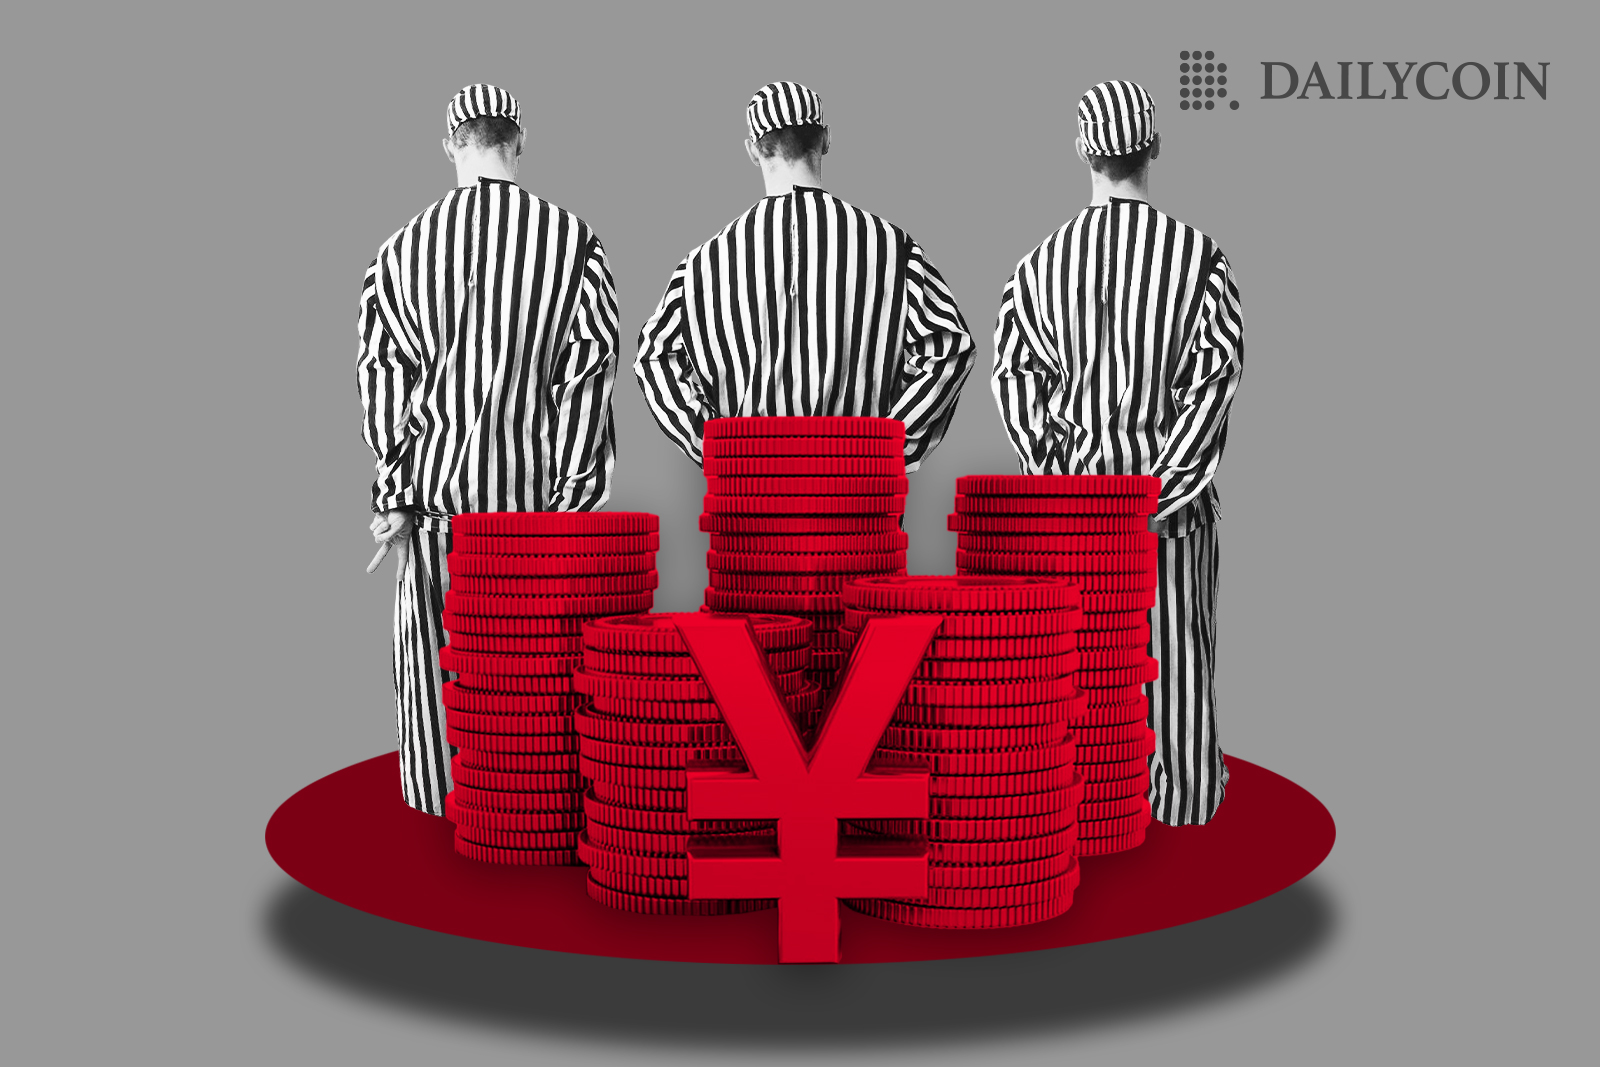 Three prisoners are standing behind a red pile of digital yen.